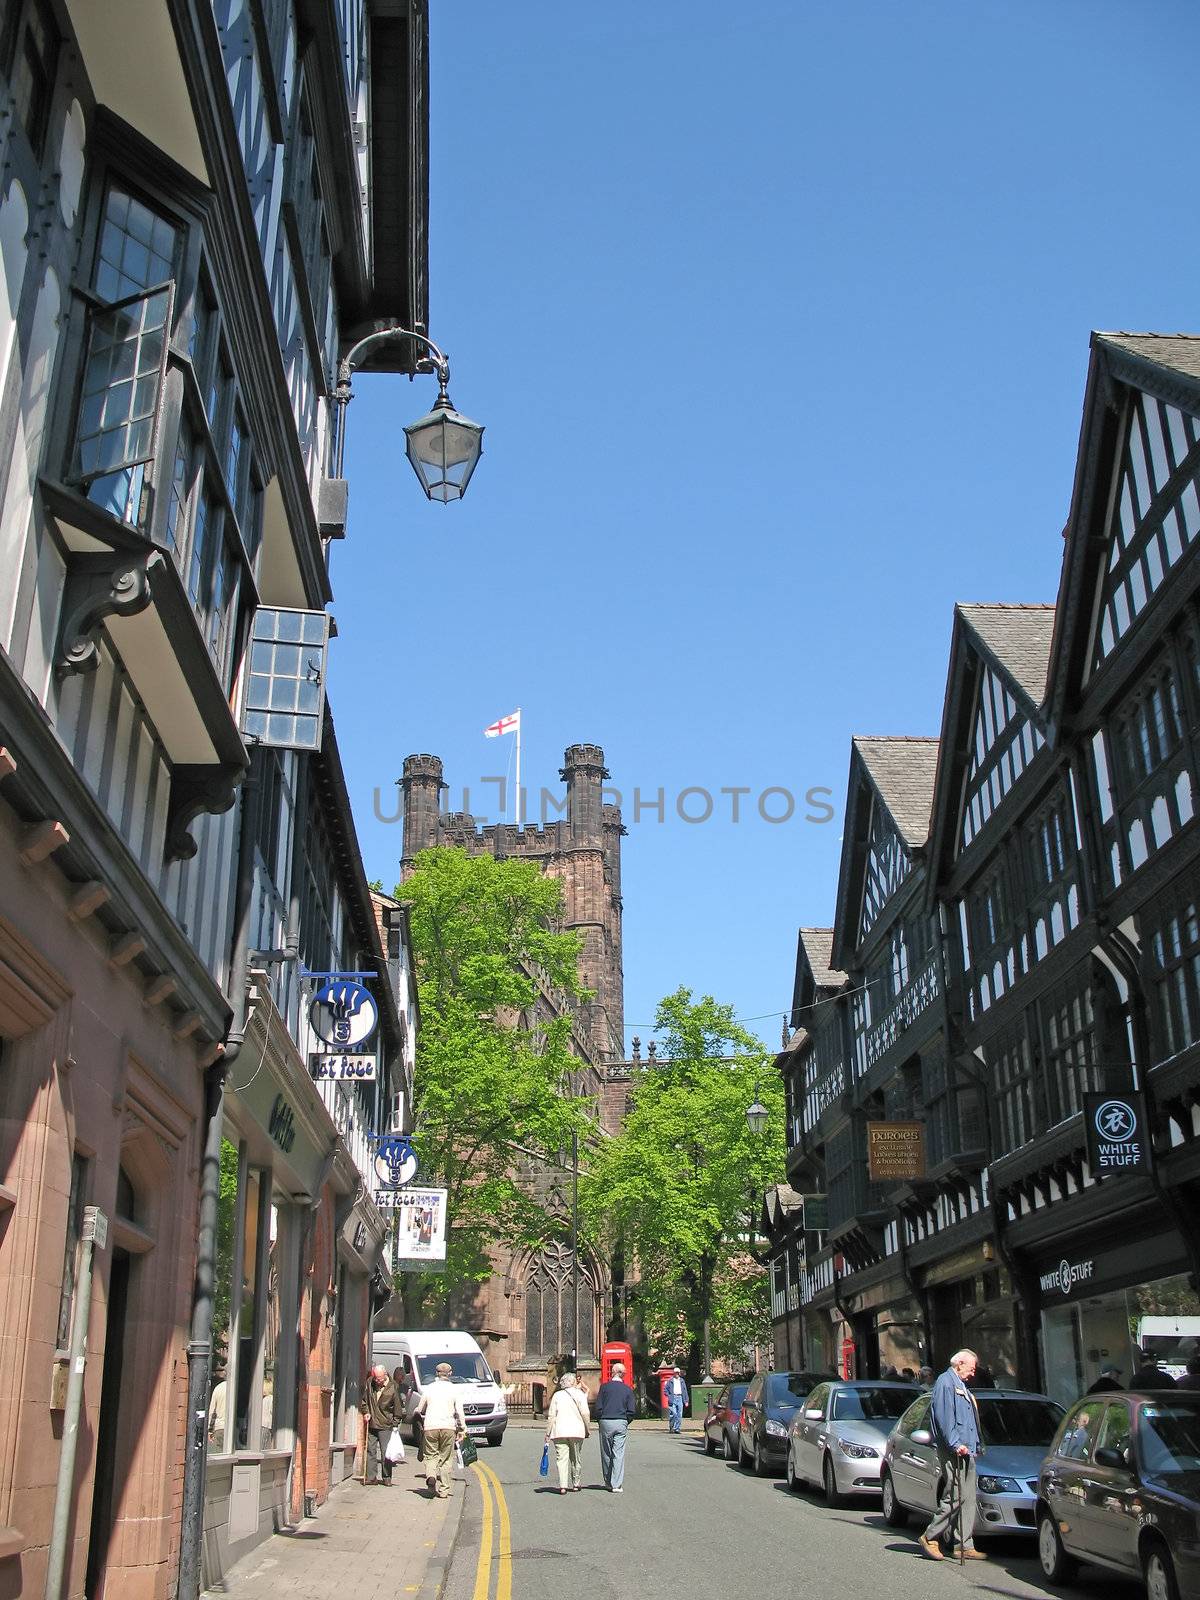 Shoppers in Chester England UK